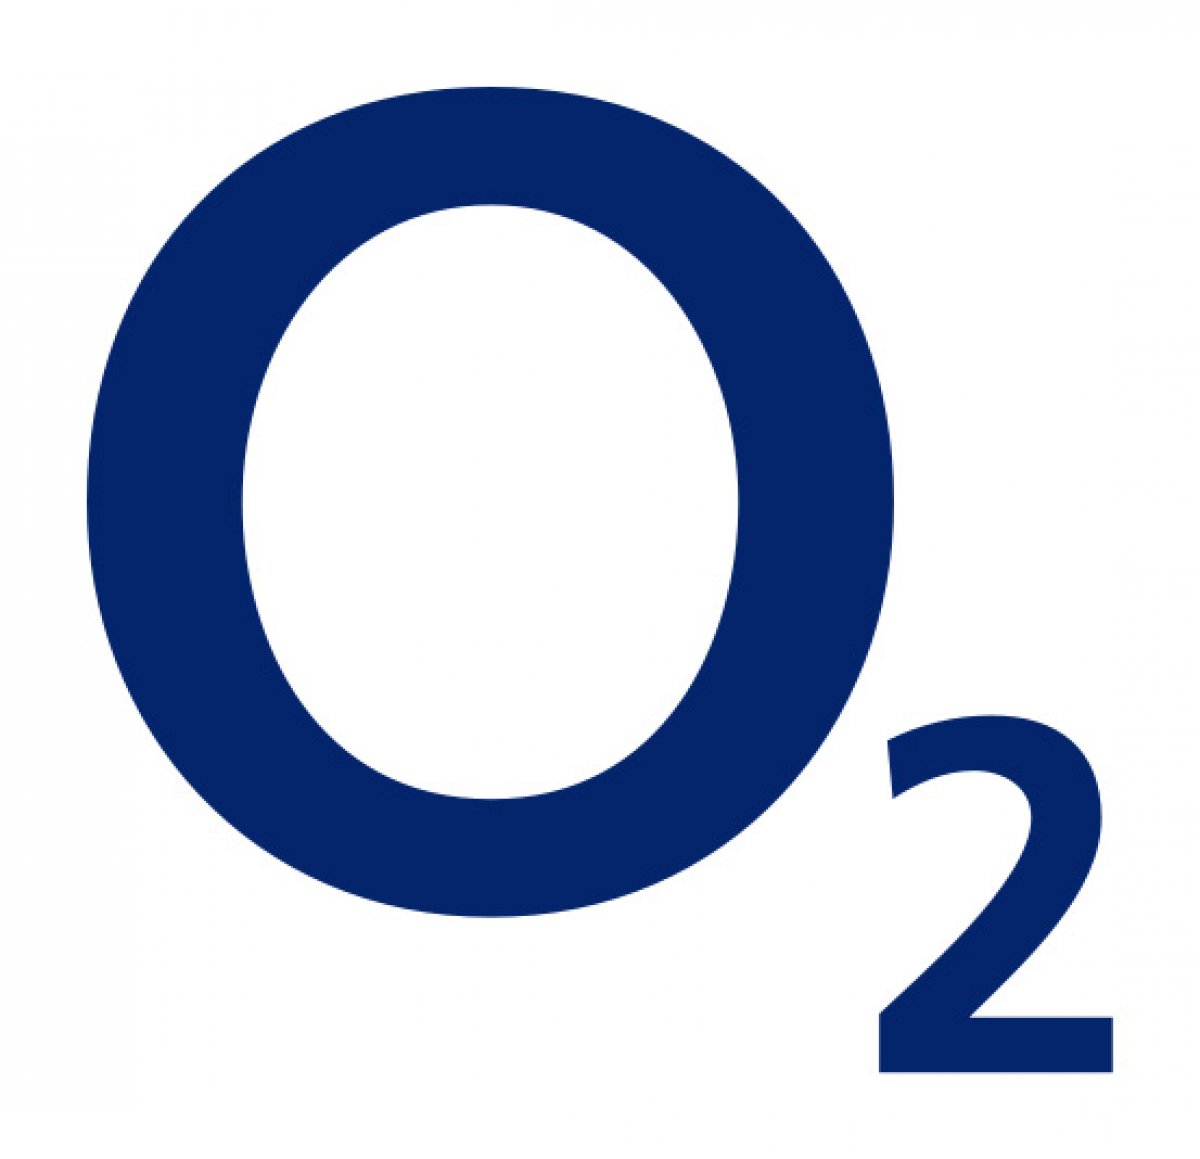 The O2: Wear The Rose Campaign Case Study | AEG Worldwide